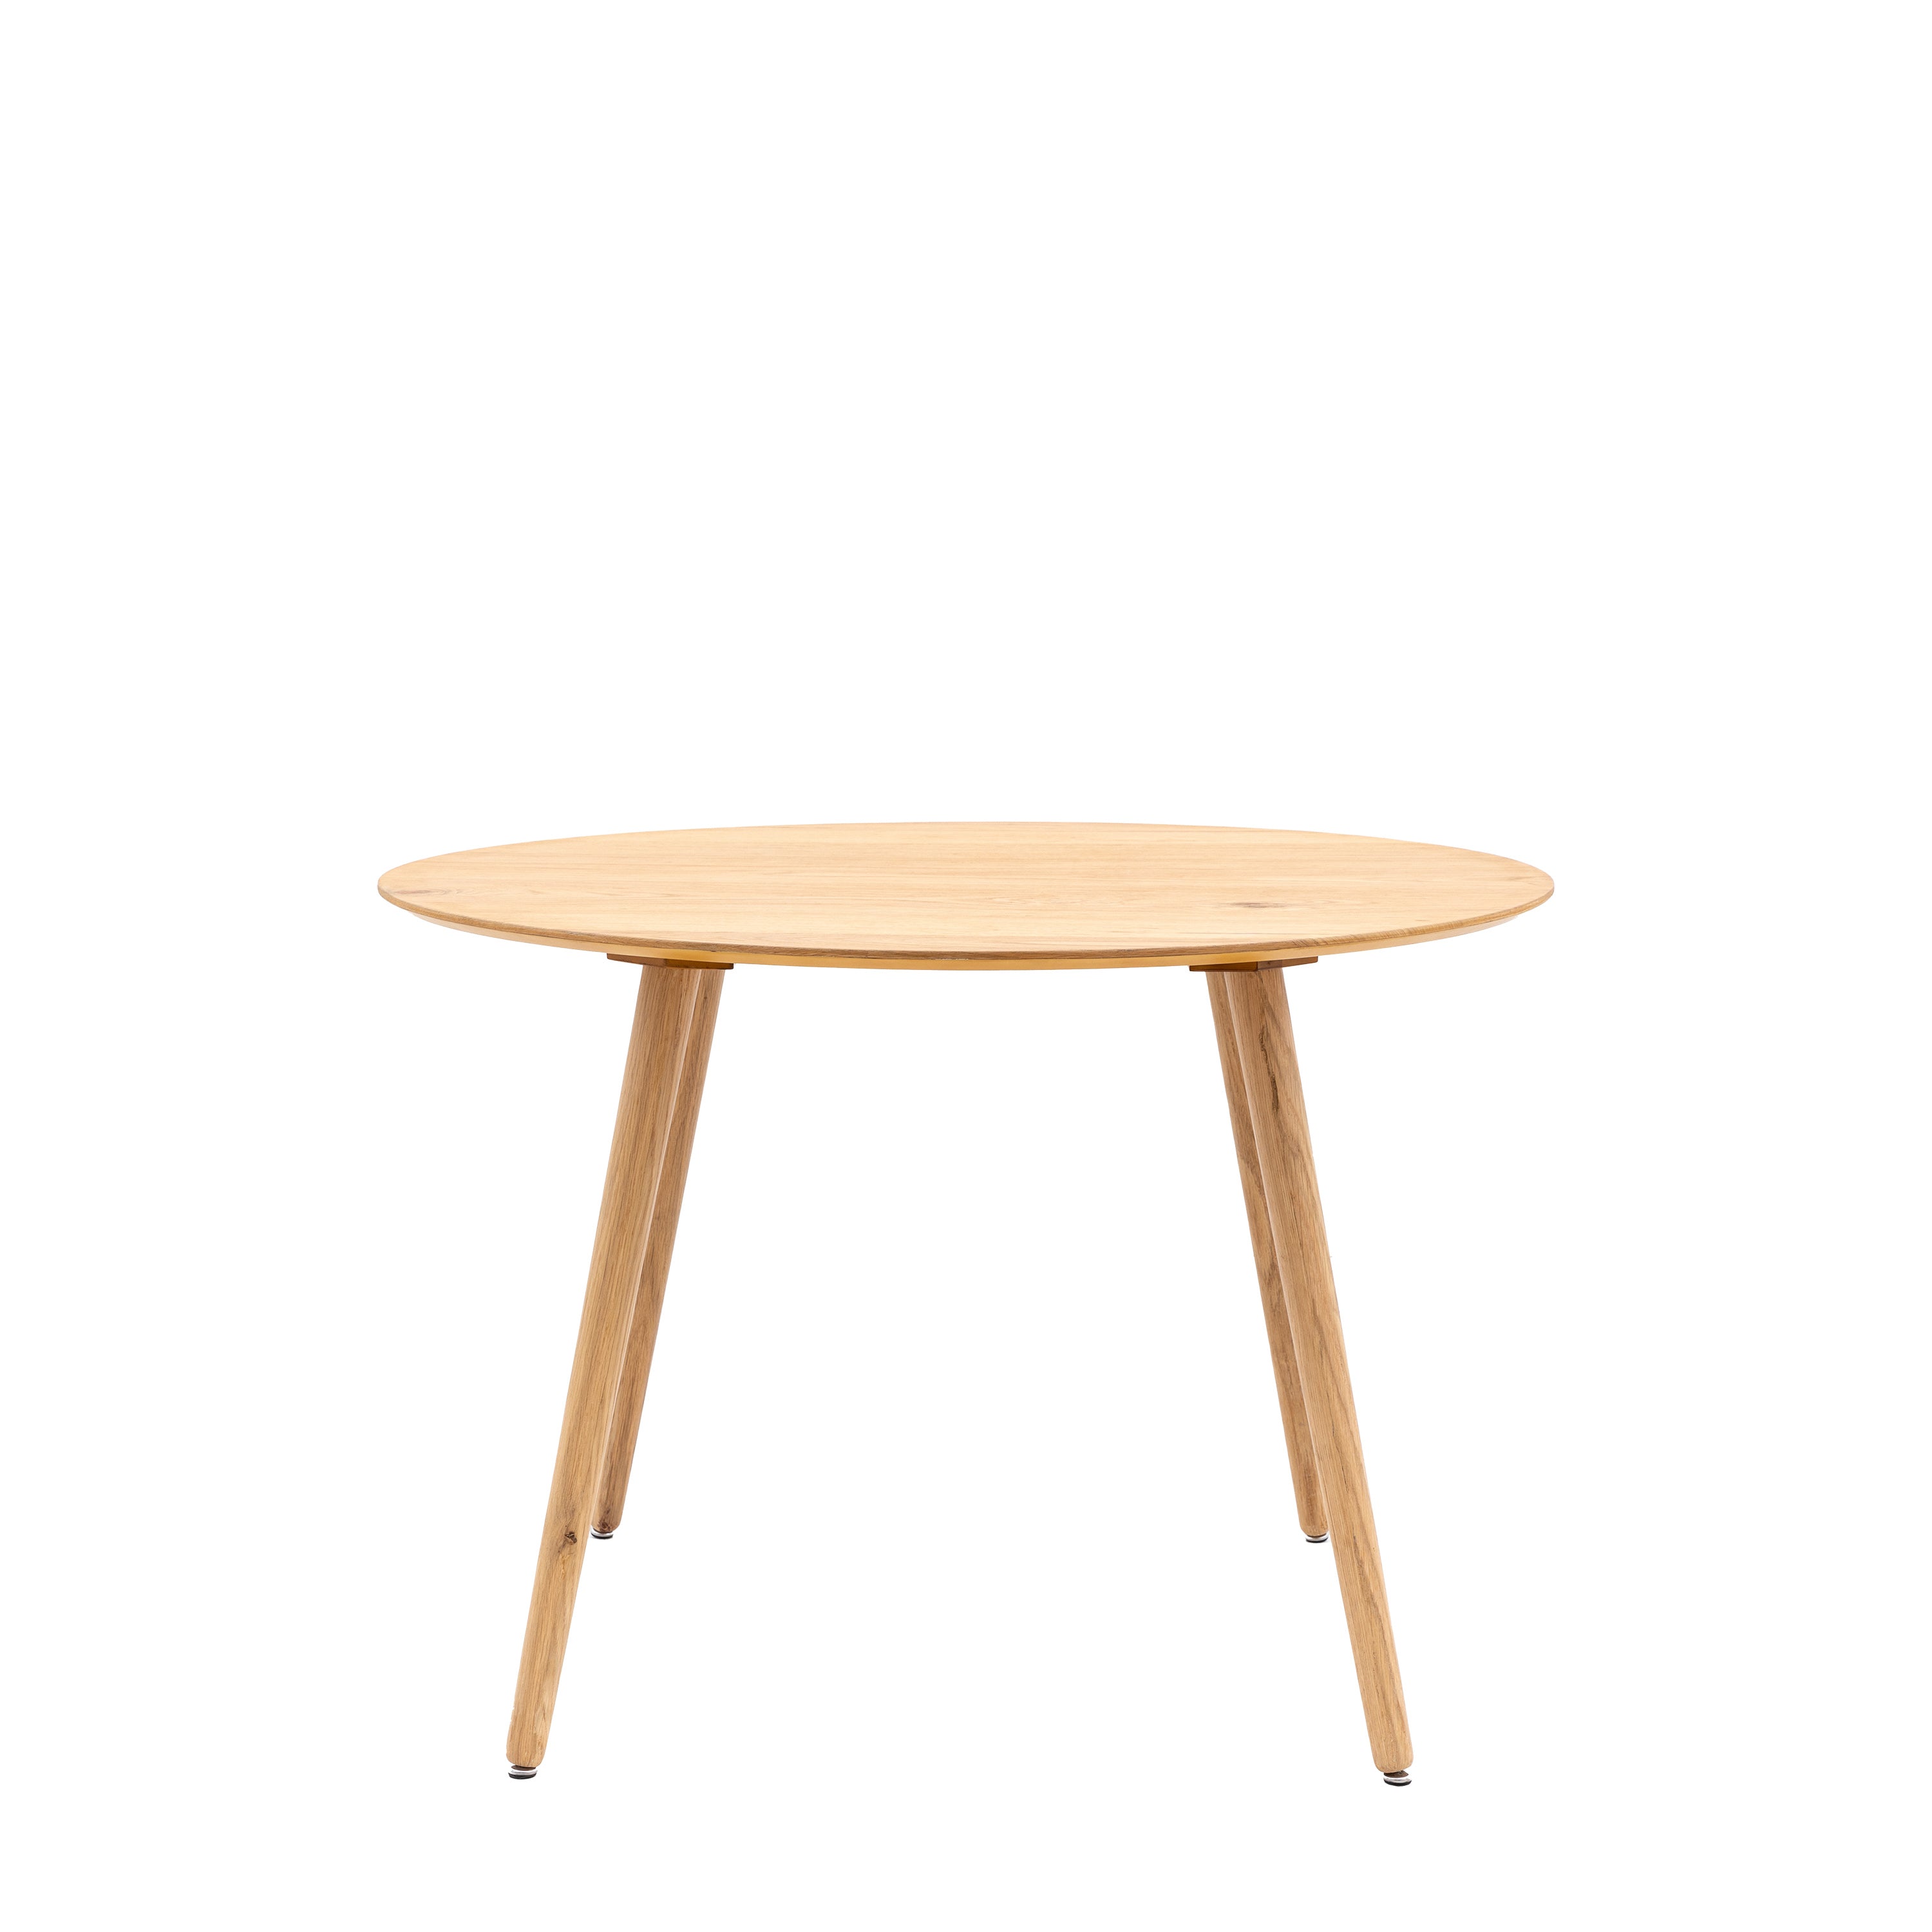 Harker Round Dining Table Natural